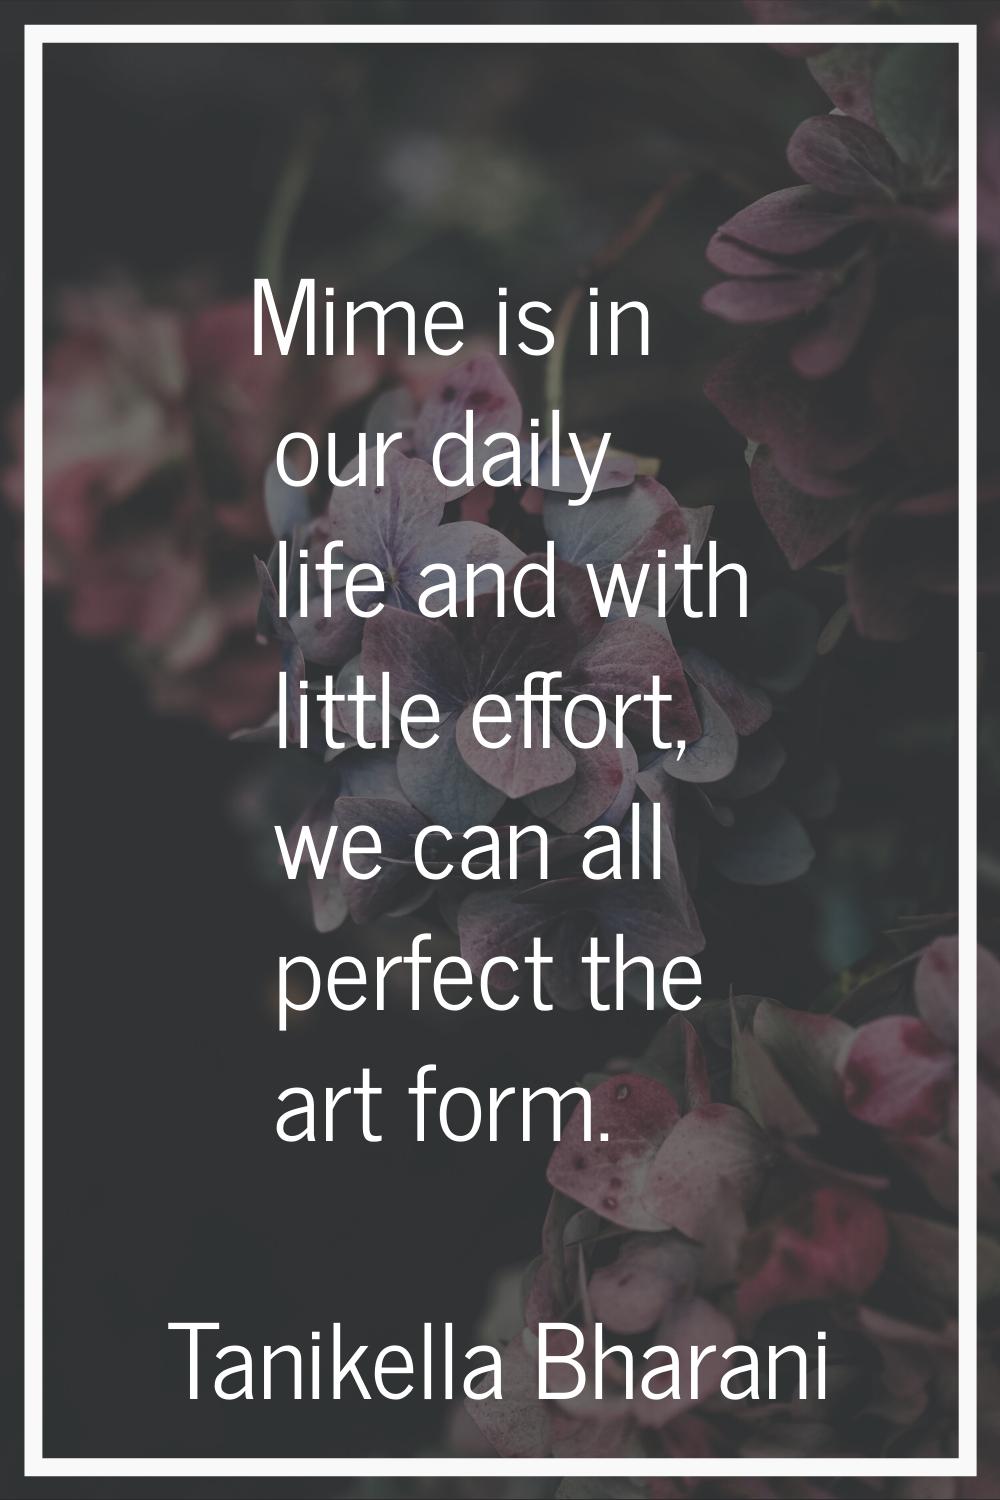 Mime is in our daily life and with little effort, we can all perfect the art form.